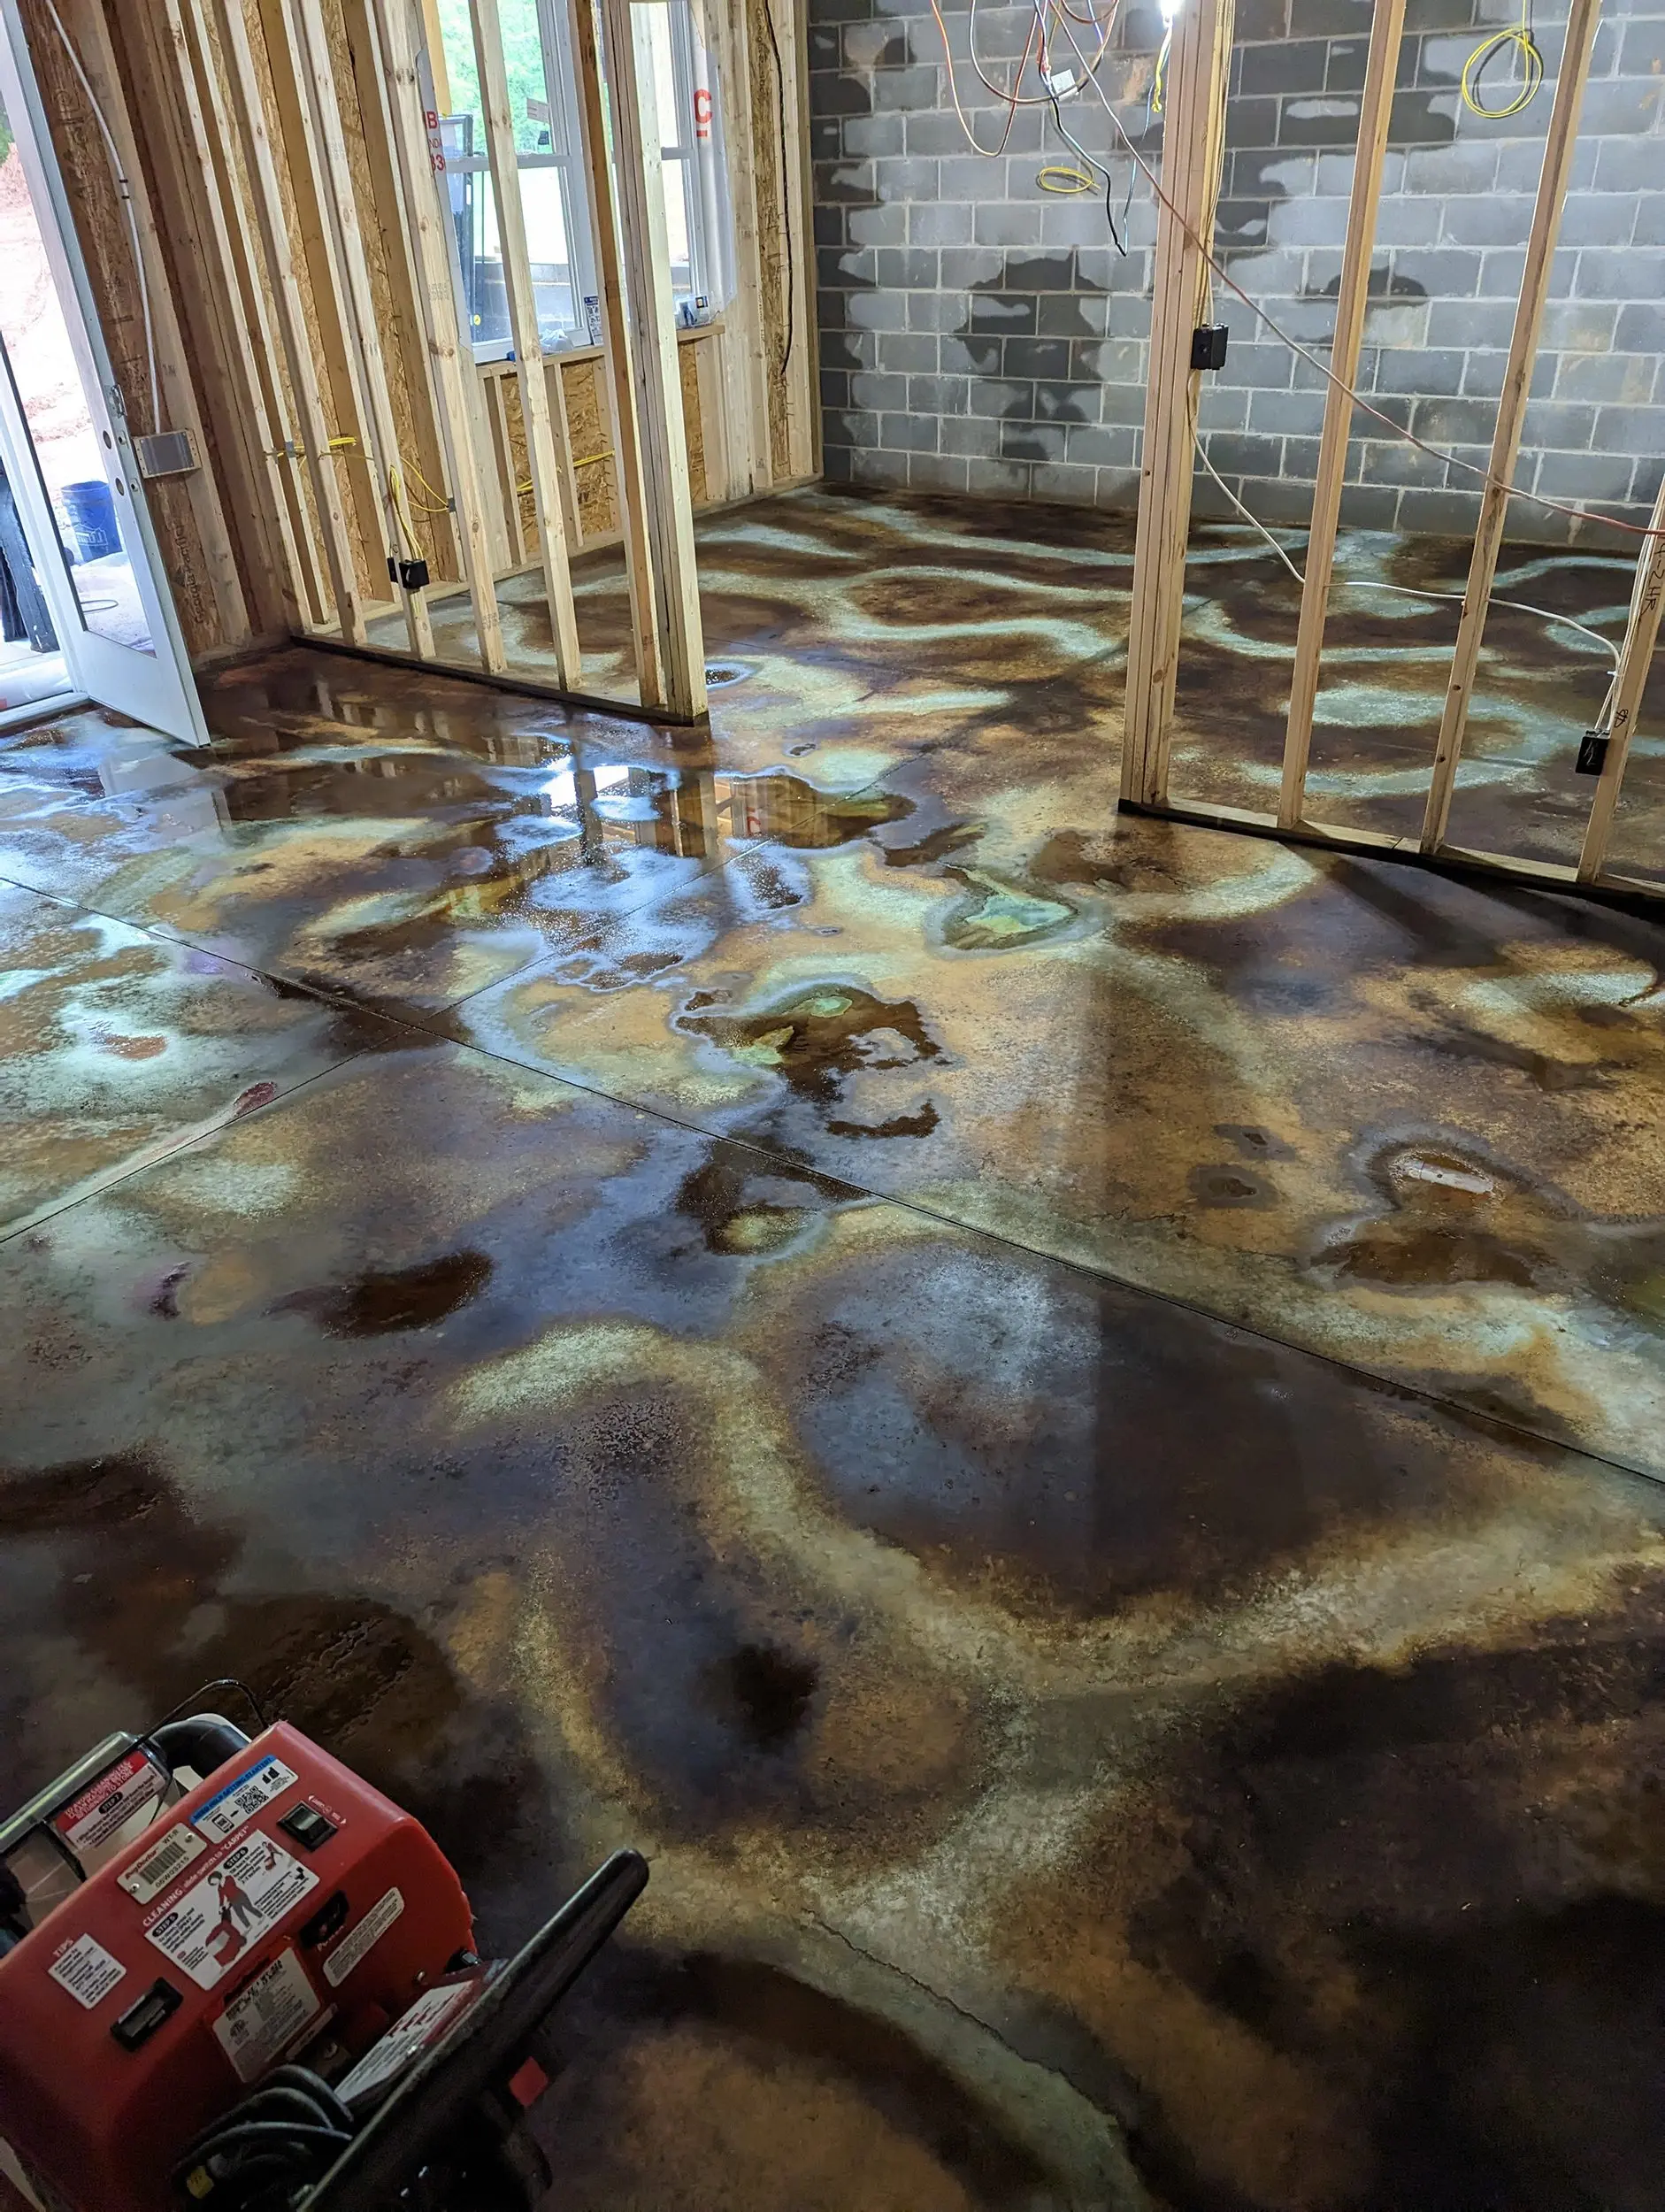 Concrete basement floor 12 hours after application of Coffee Brown, Malayan Buff, and Seagrass acid stains